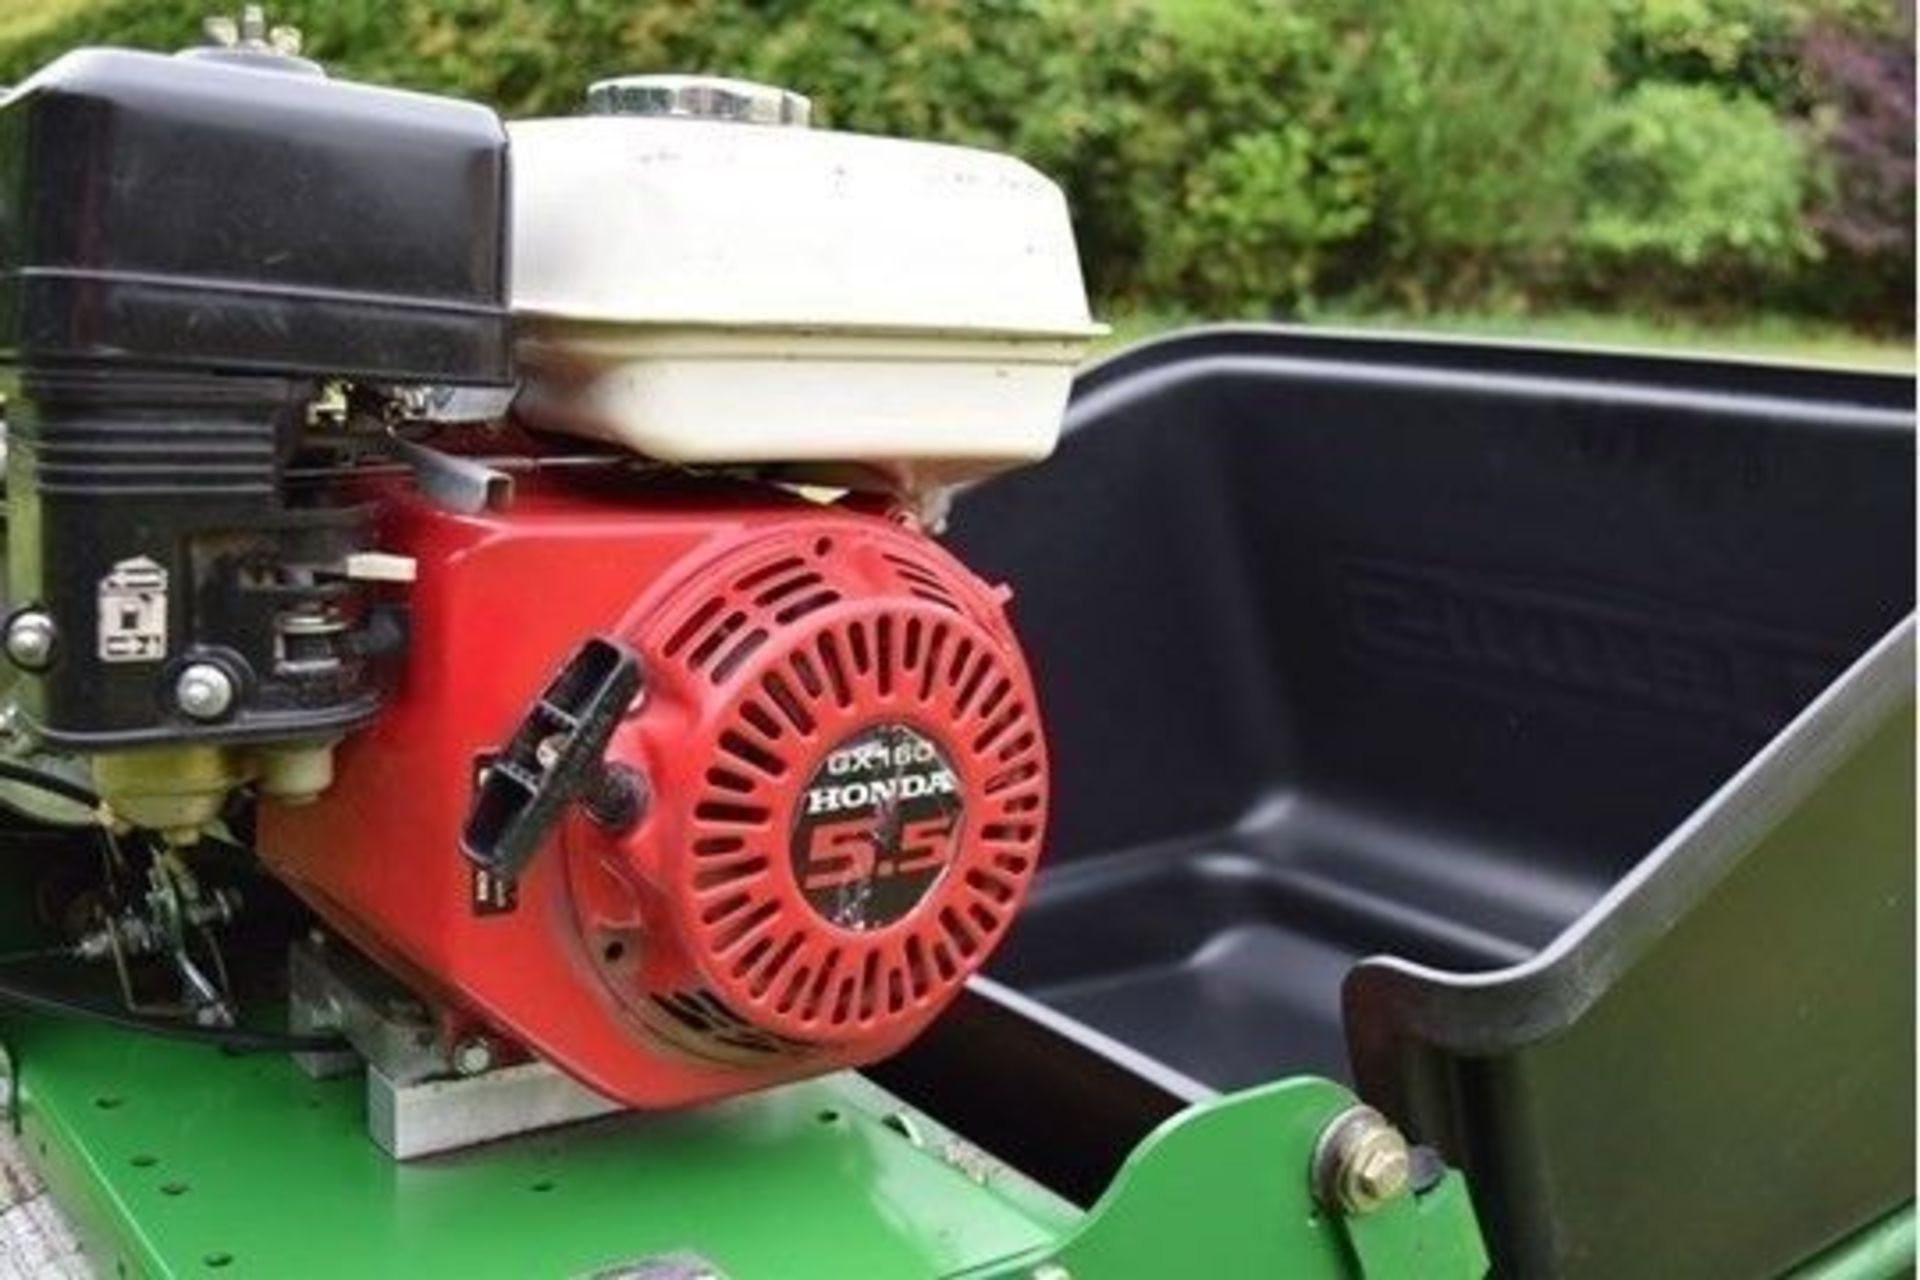 2004 Dennis G560 5 Blade Cylinder Mower With Grass Box - Image 3 of 11